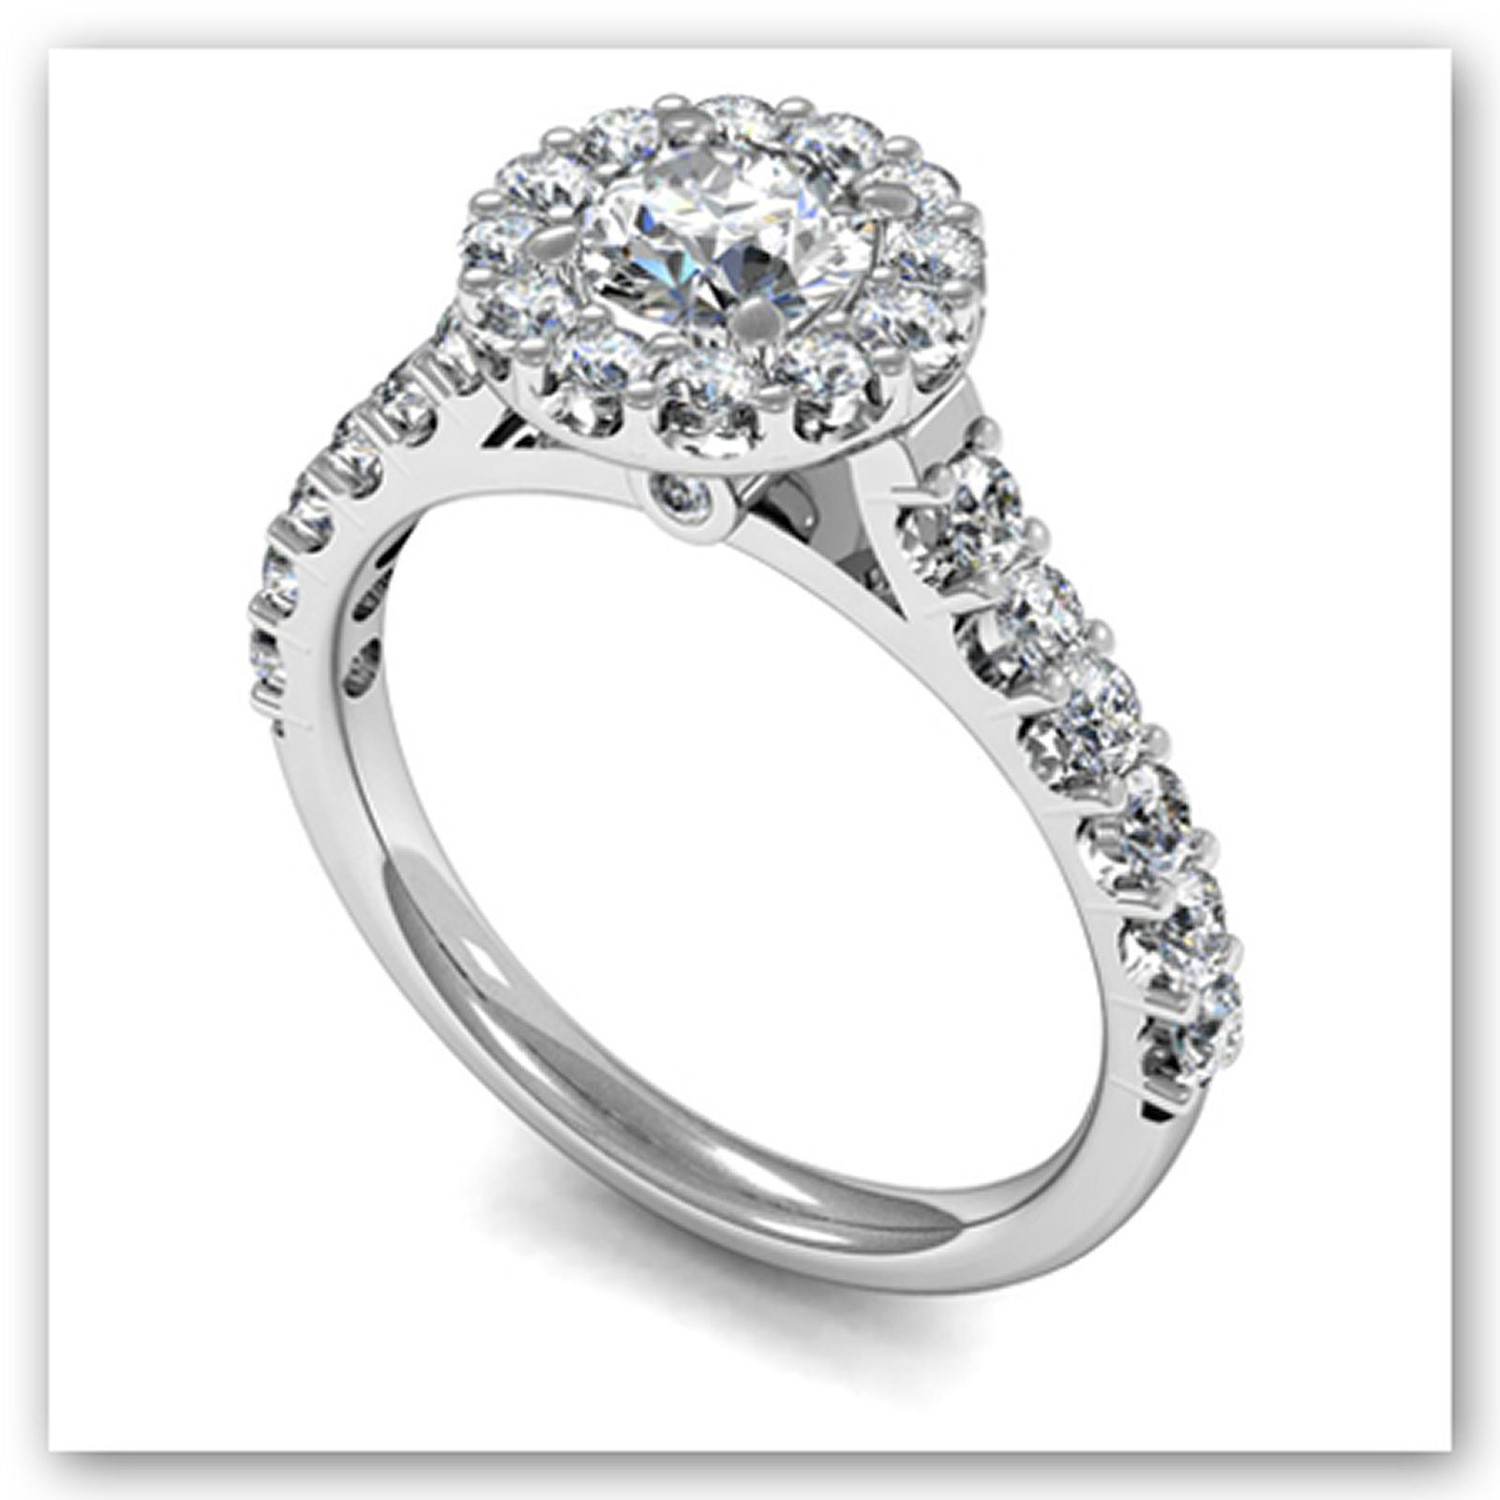 Nwe Diamond Ring Designs Wedding Dress from Je t'aime